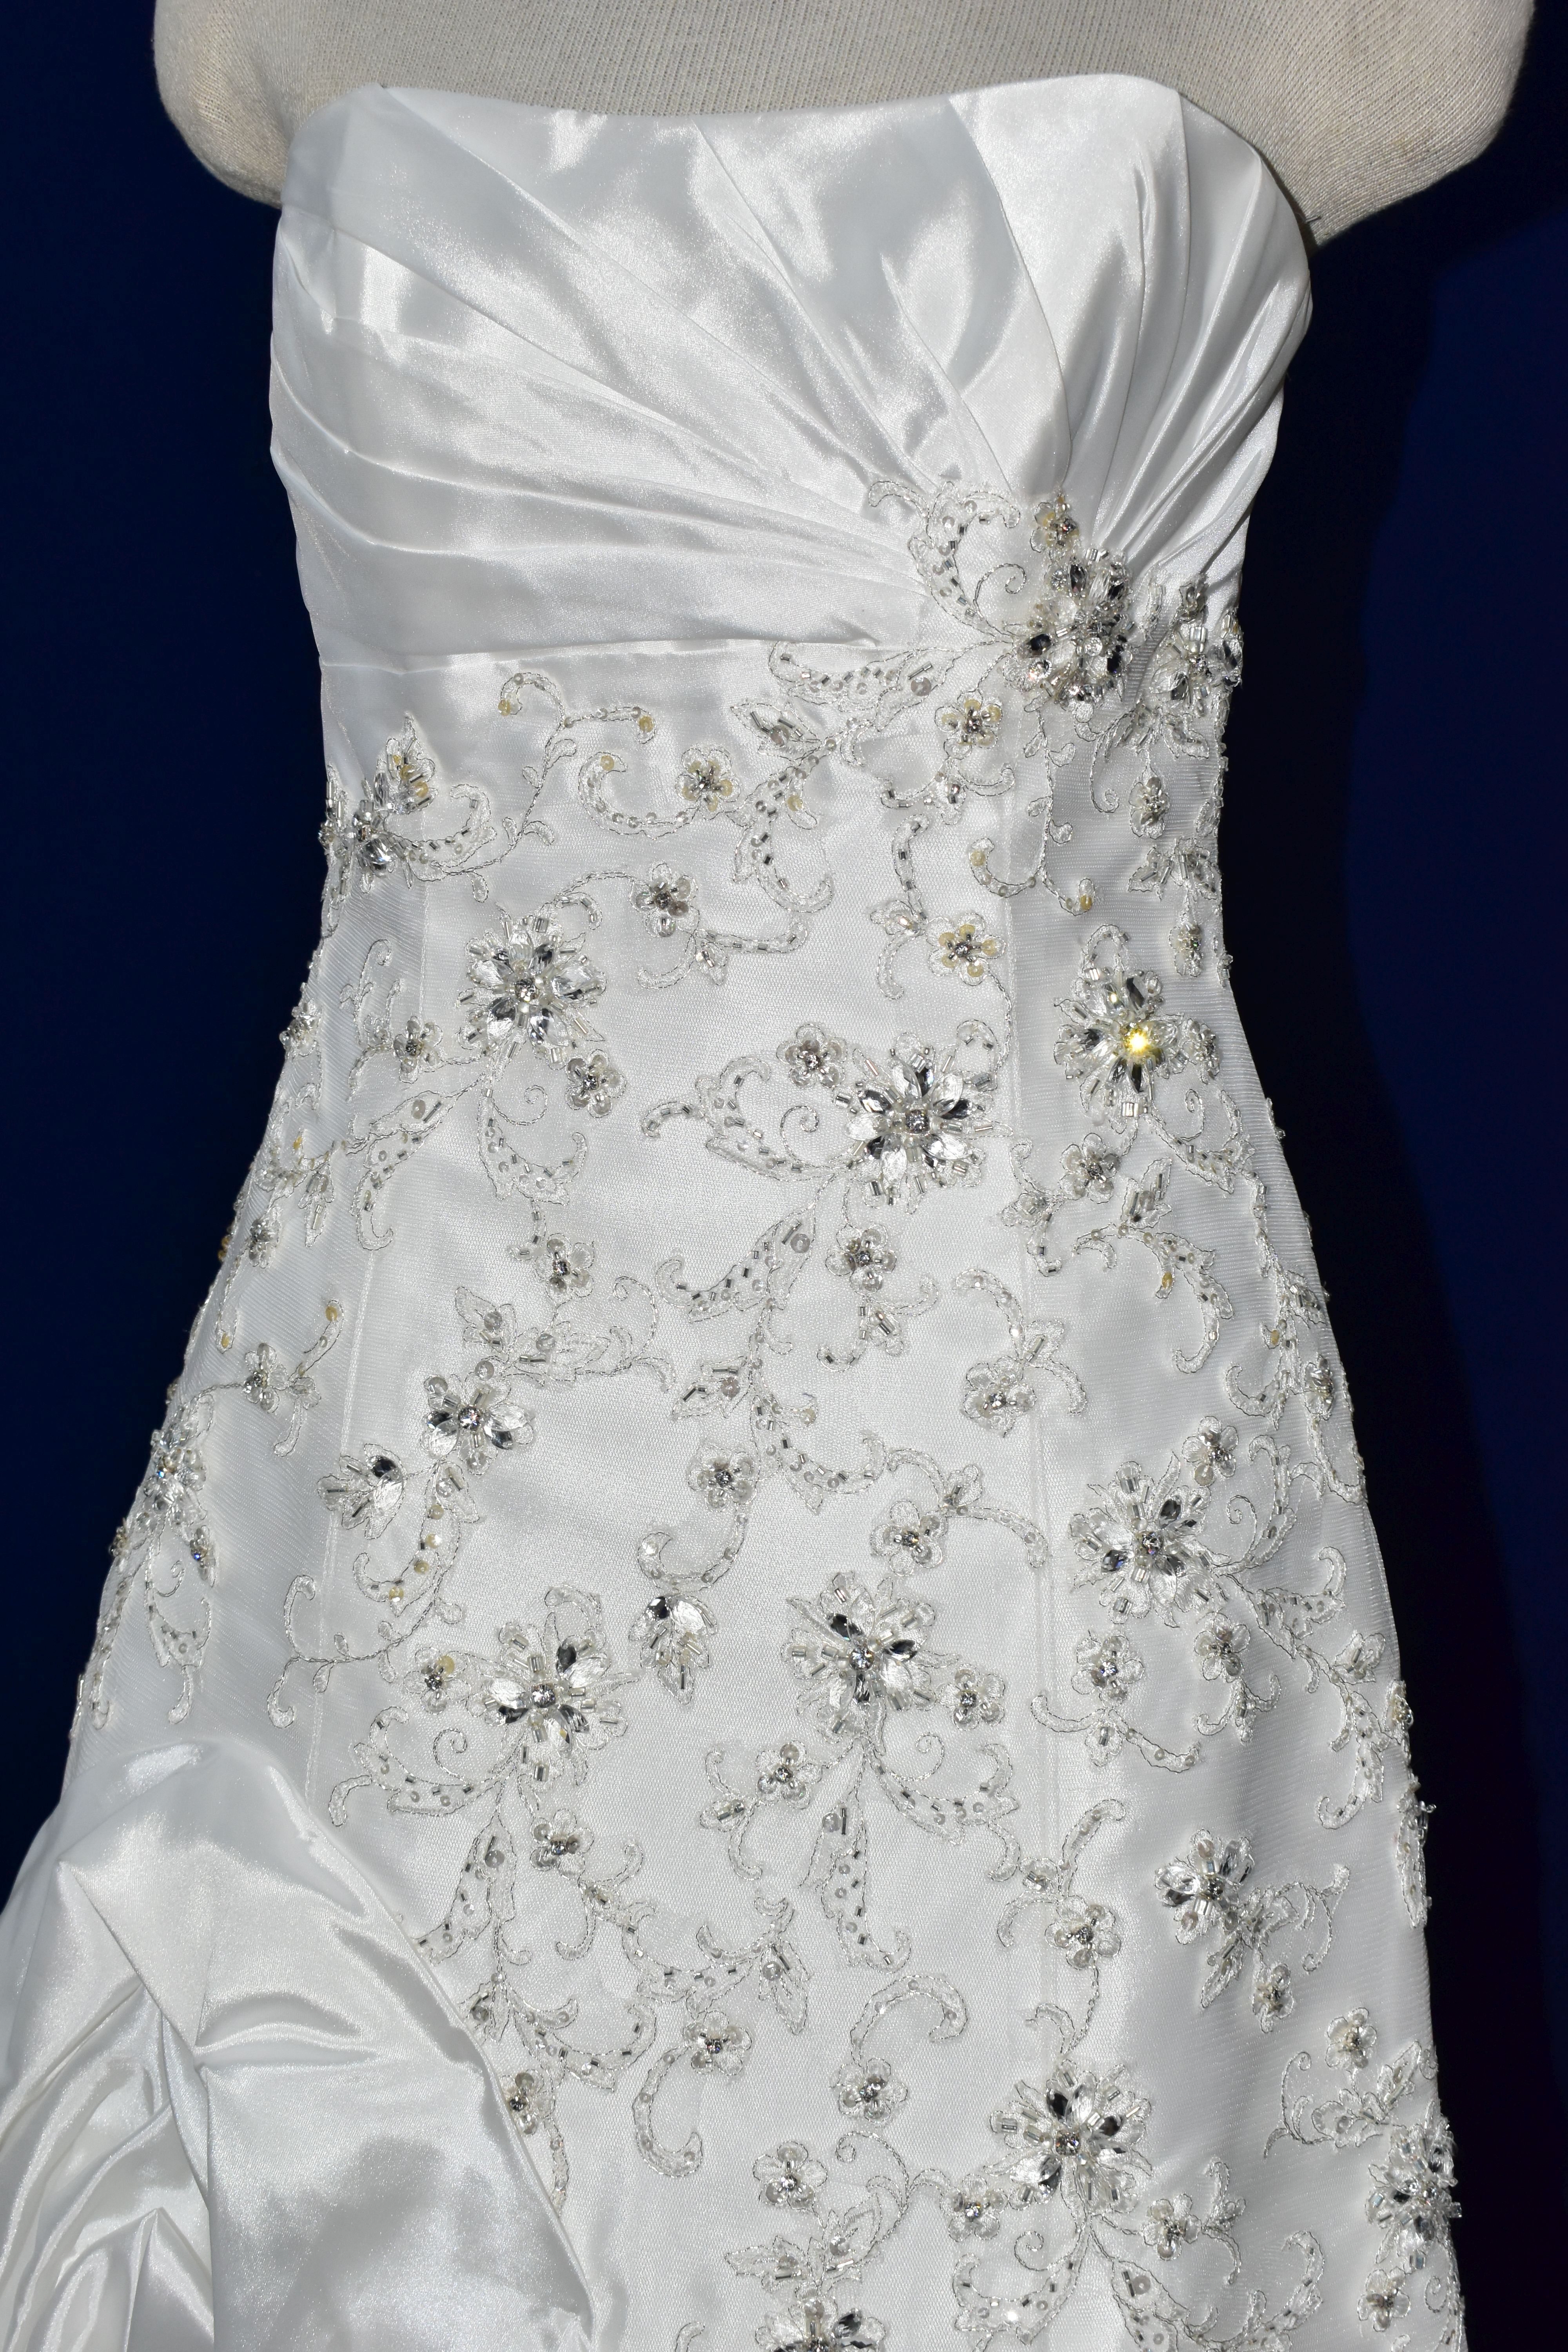 WEDDING GOWN, 'Sophia Tolli' white satin, size 8, strapless, ruched skirt, beaded detail on - Image 3 of 17